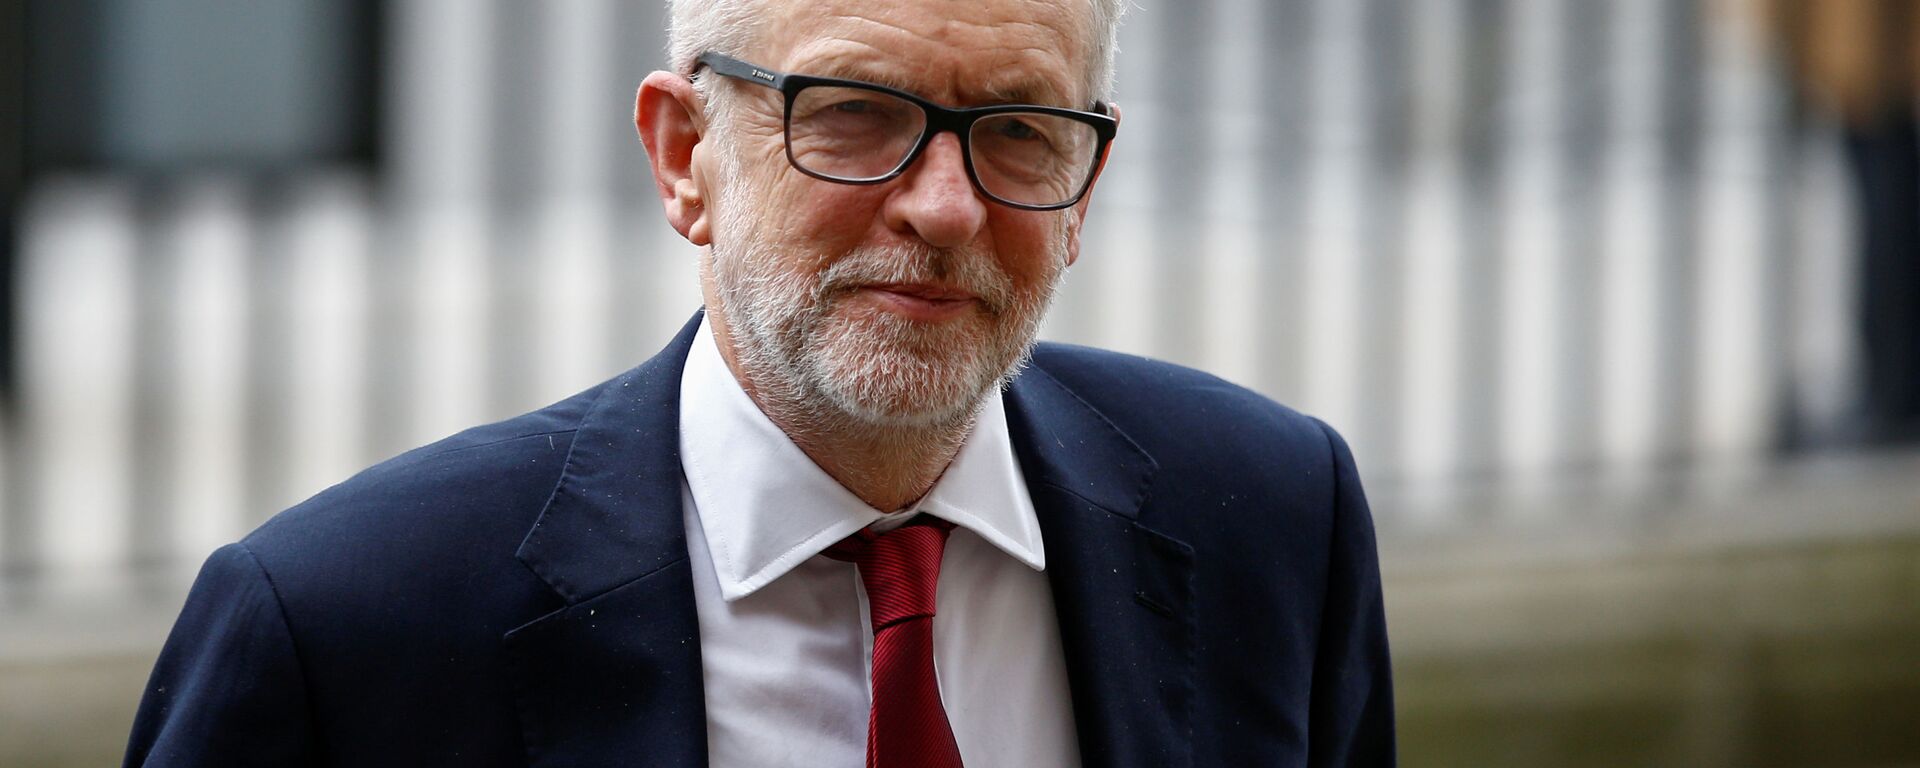 Britain's Labour Party leader Jeremy Corbyn arrives for the annual Commonwealth Service at Westminster Abbey in London, Britain March 9, 2020. - Sputnik International, 1920, 18.11.2020